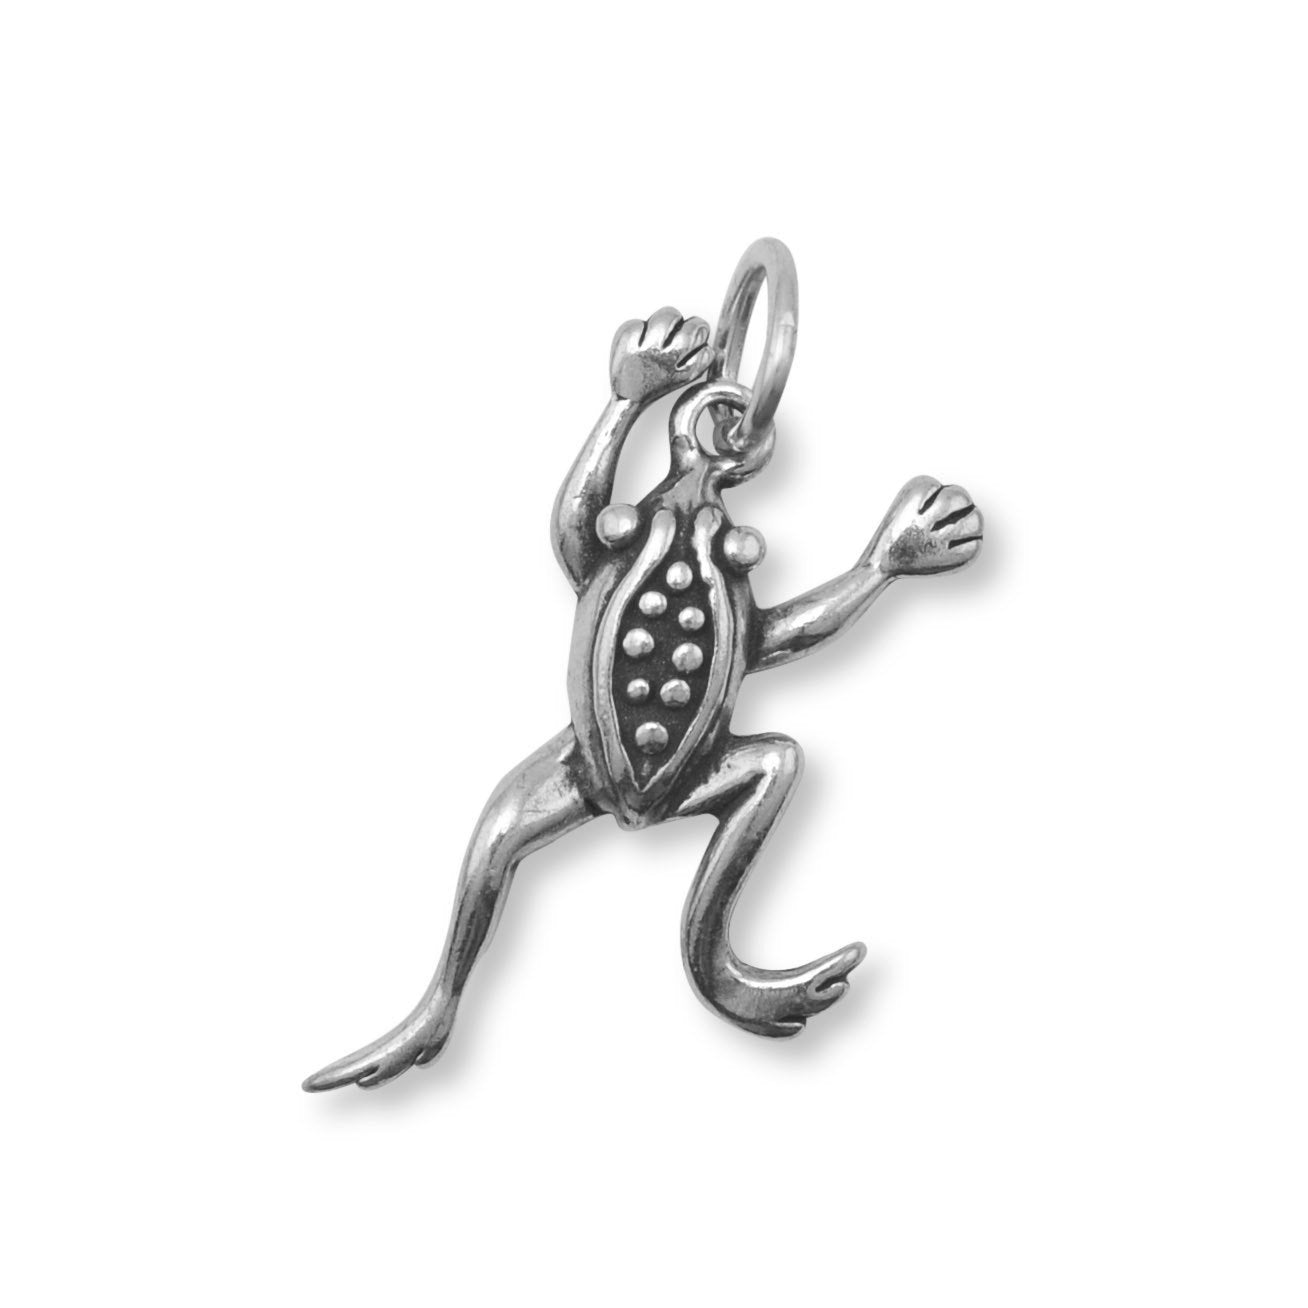 Sterling Silver Oxidized Leaping Frog Bracelet Charm